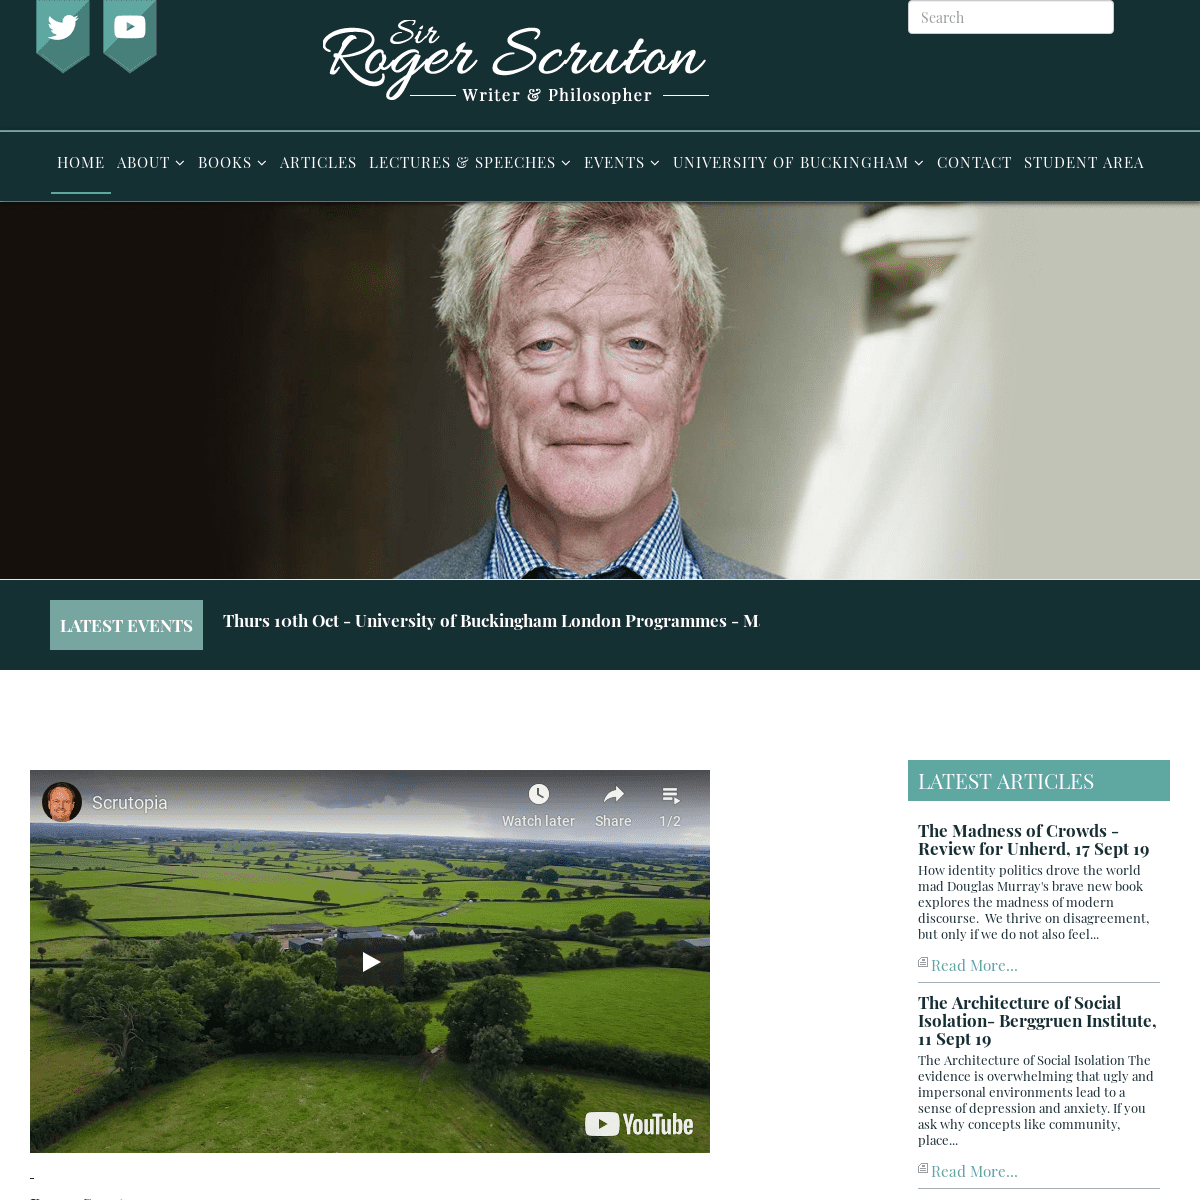 A complete backup of roger-scruton.com